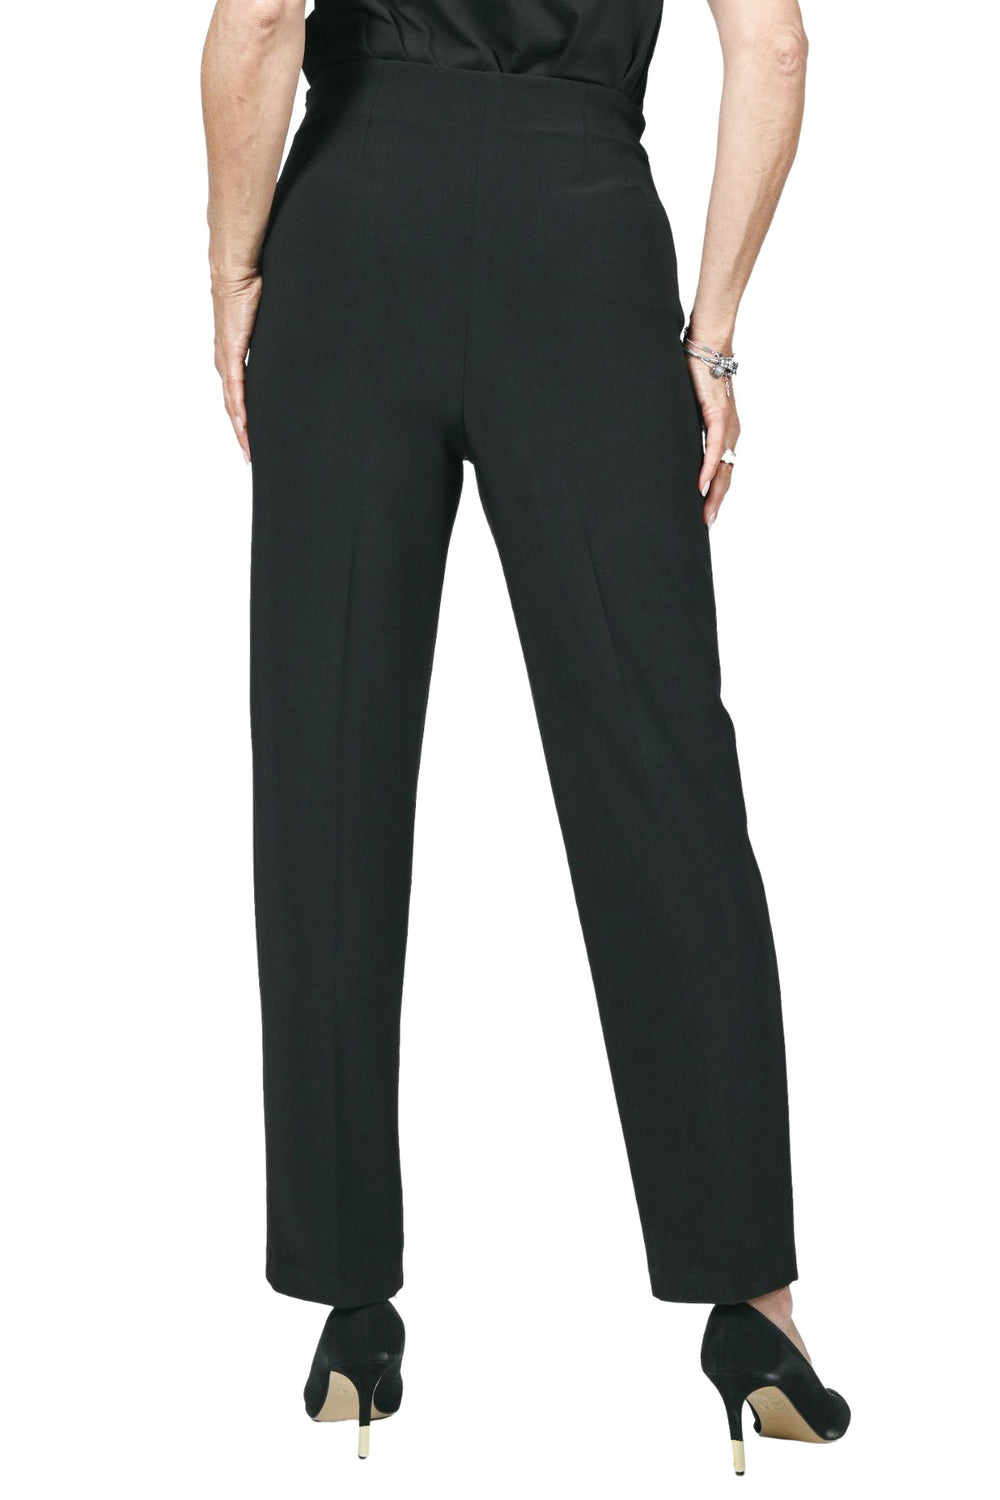 Woman wearing a pair of black knit pants by Frank Lyman , Sold and shipped from Pizazz Boutique